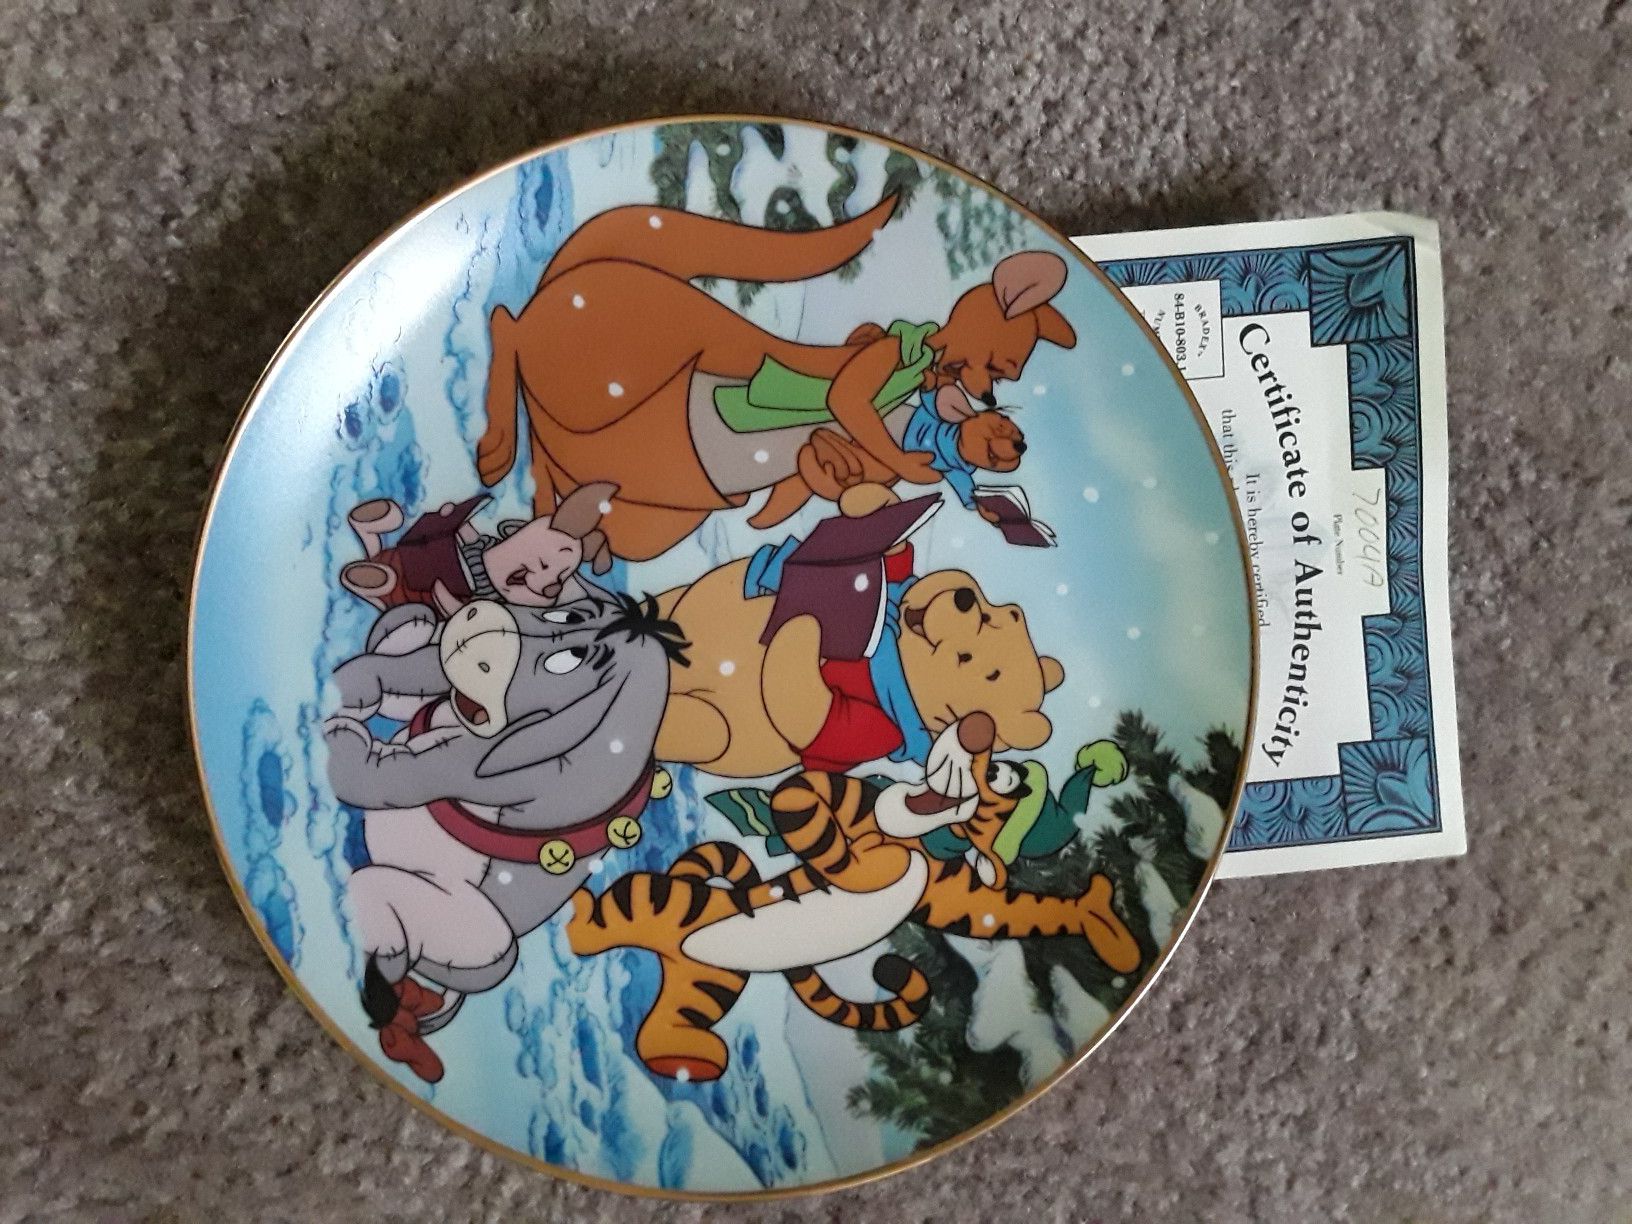 1 Disney plate with gold lining